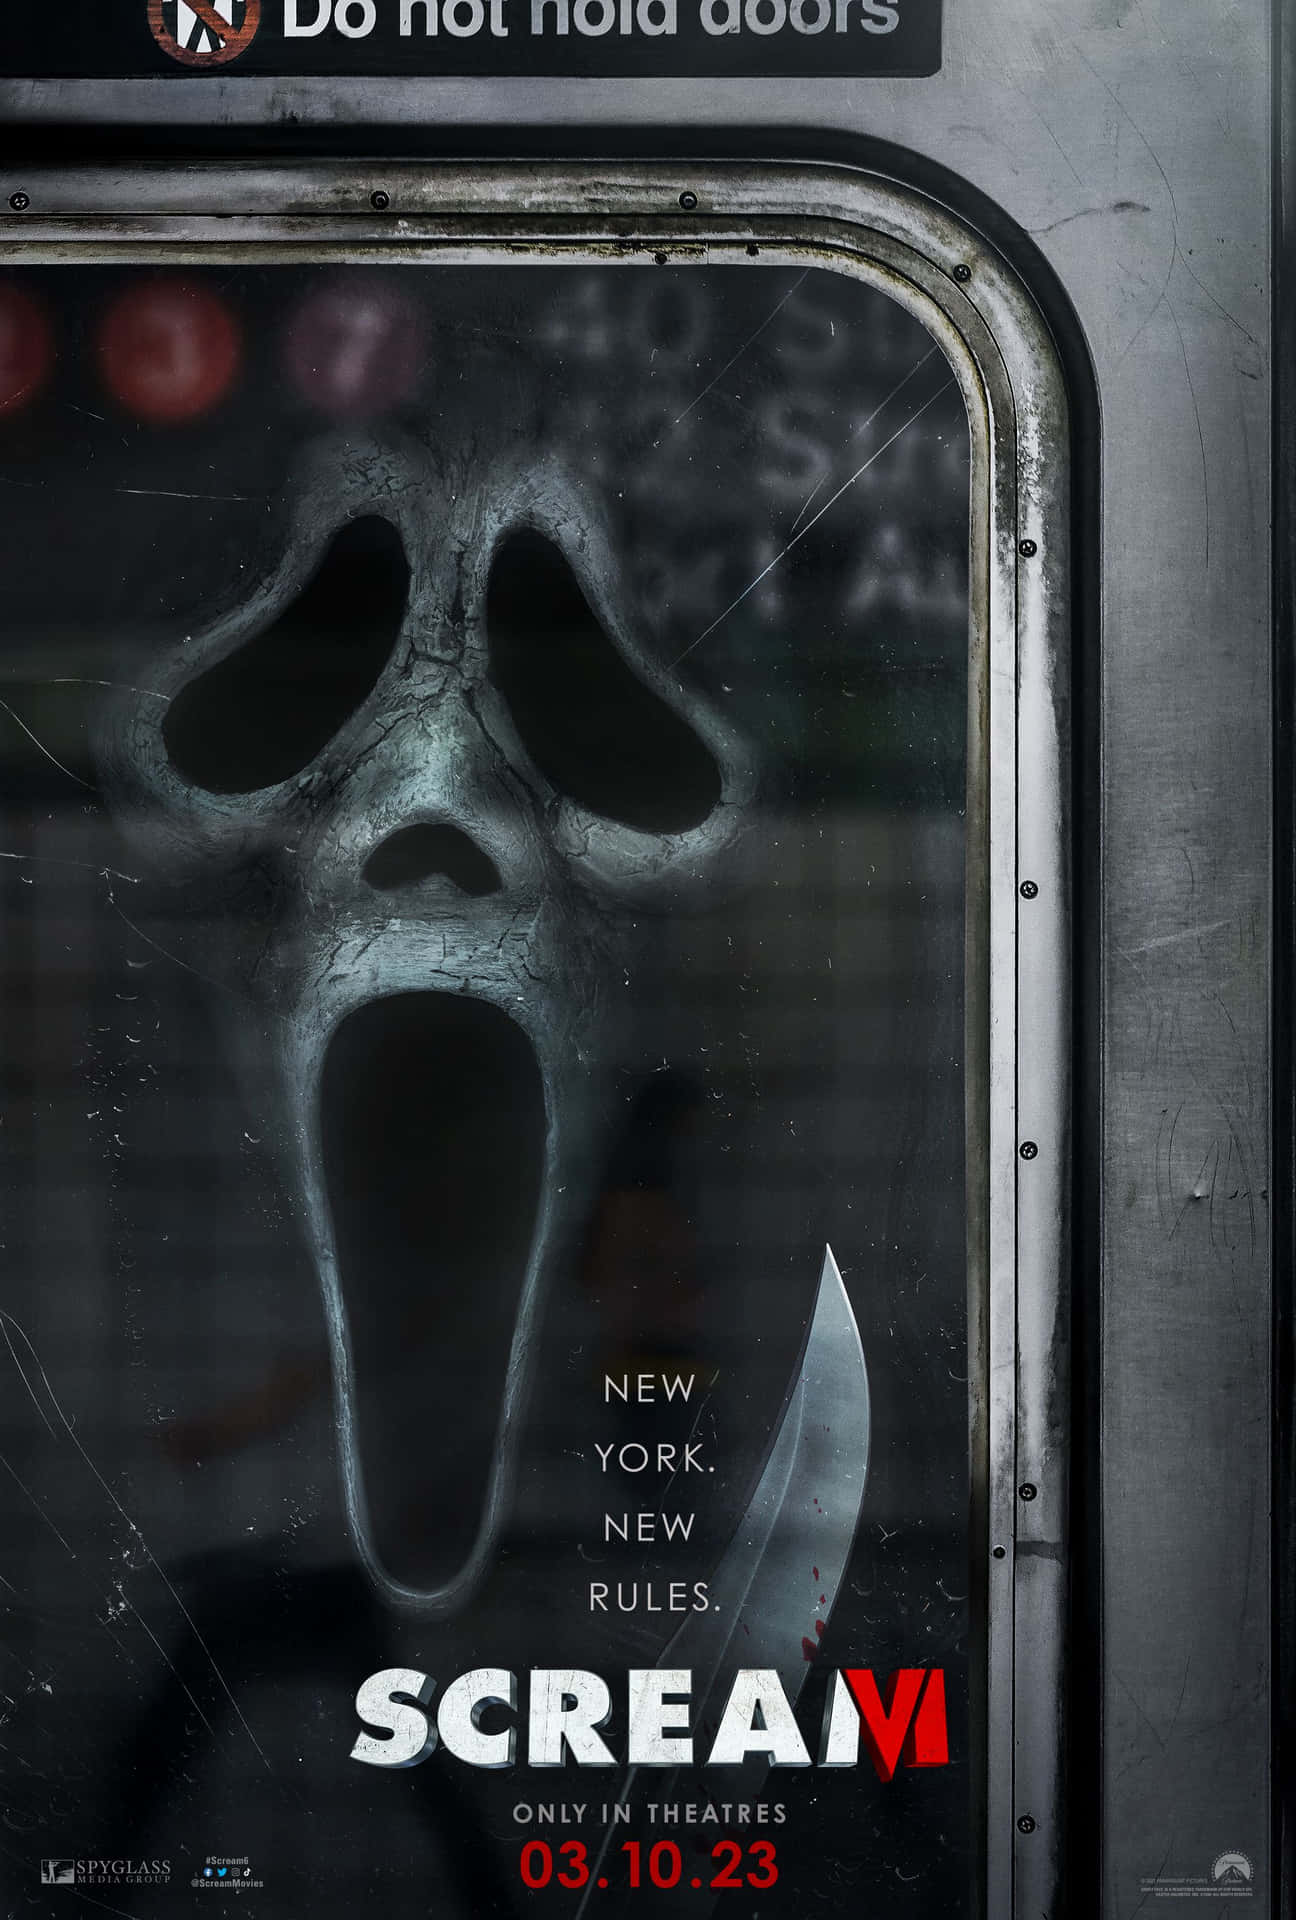 Scream V Poster With A Face On It